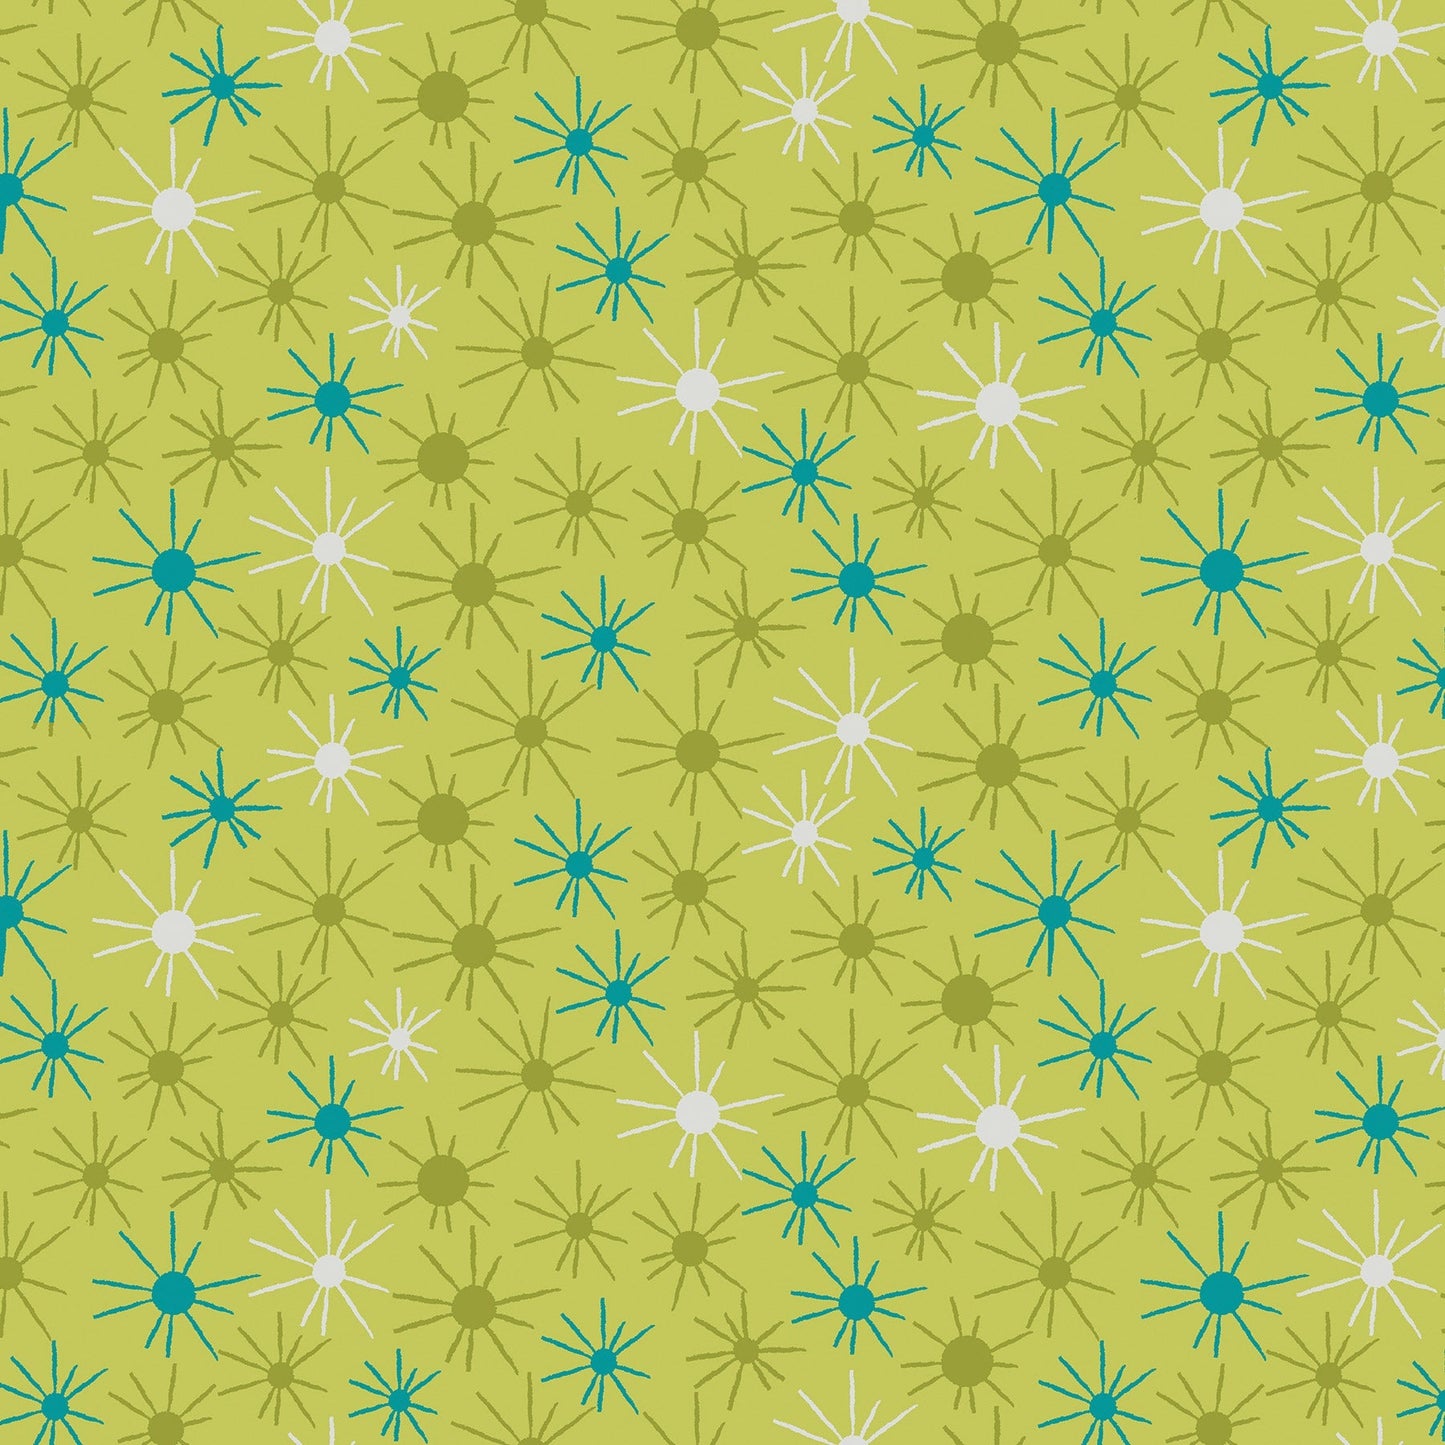  Sunny Day in green (13265-42) is from Stitchy by Christa Watson for Benartex. This print captures the joy of making beautiful things with fabric and thread while the day is young and full or possibilities. It features tone-on-tone and coordinated sunbursts  in shades of green ranging from chartruese to olive, with a hint of turquoise and pink to brighten up any project. 